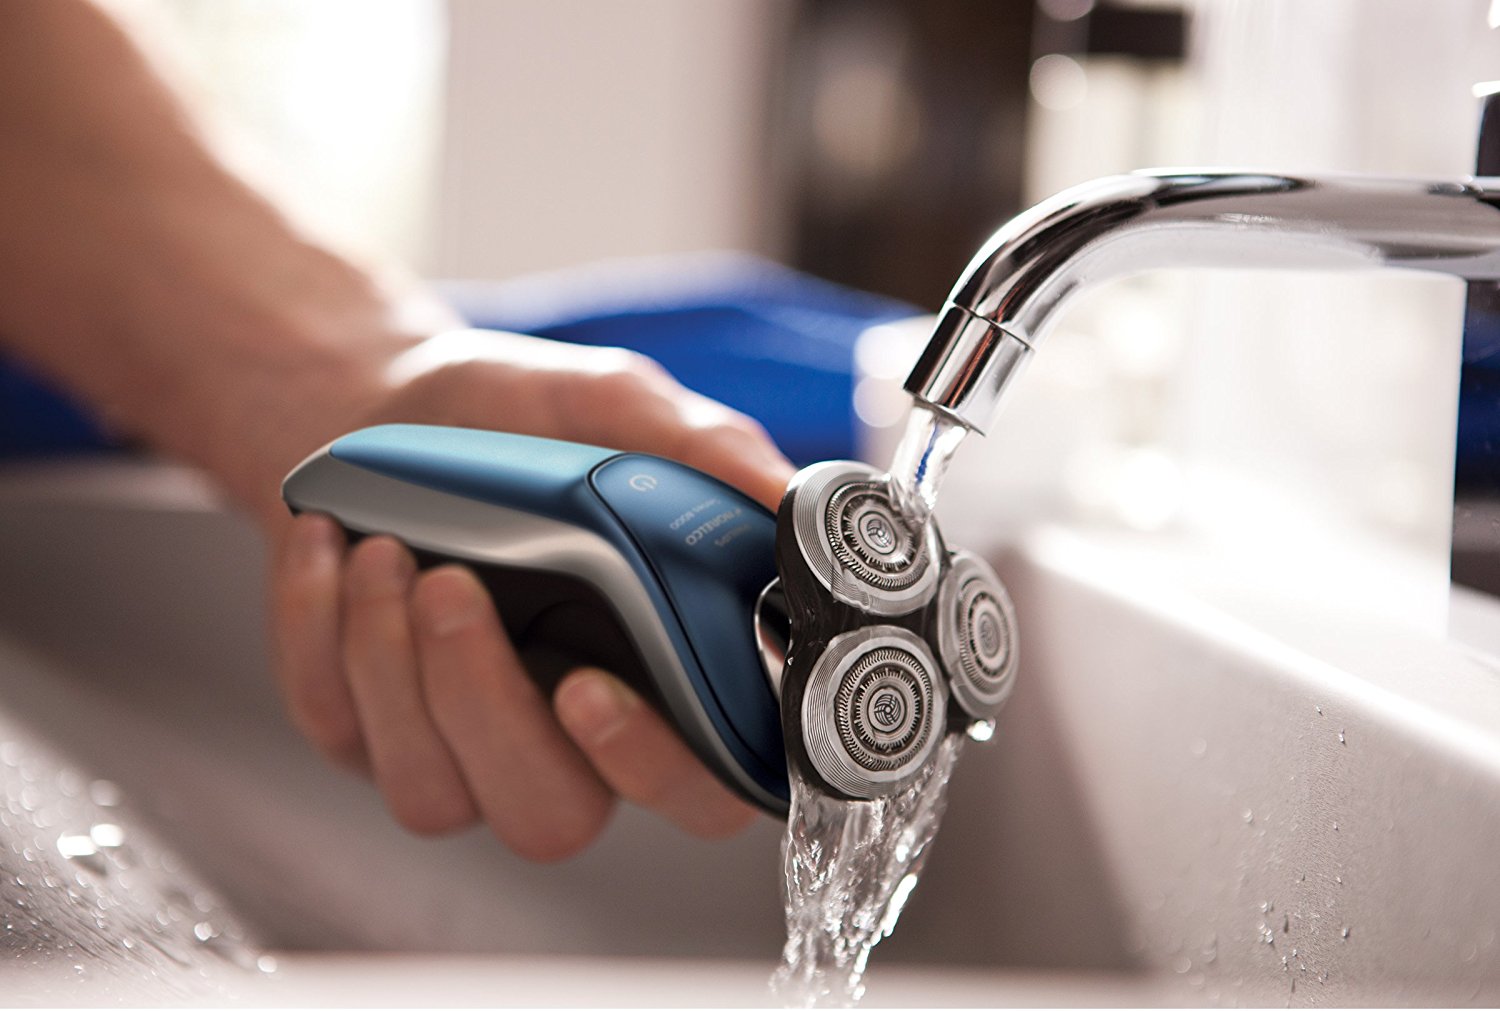 Philips Norelco Electric Shaver 8900 Review